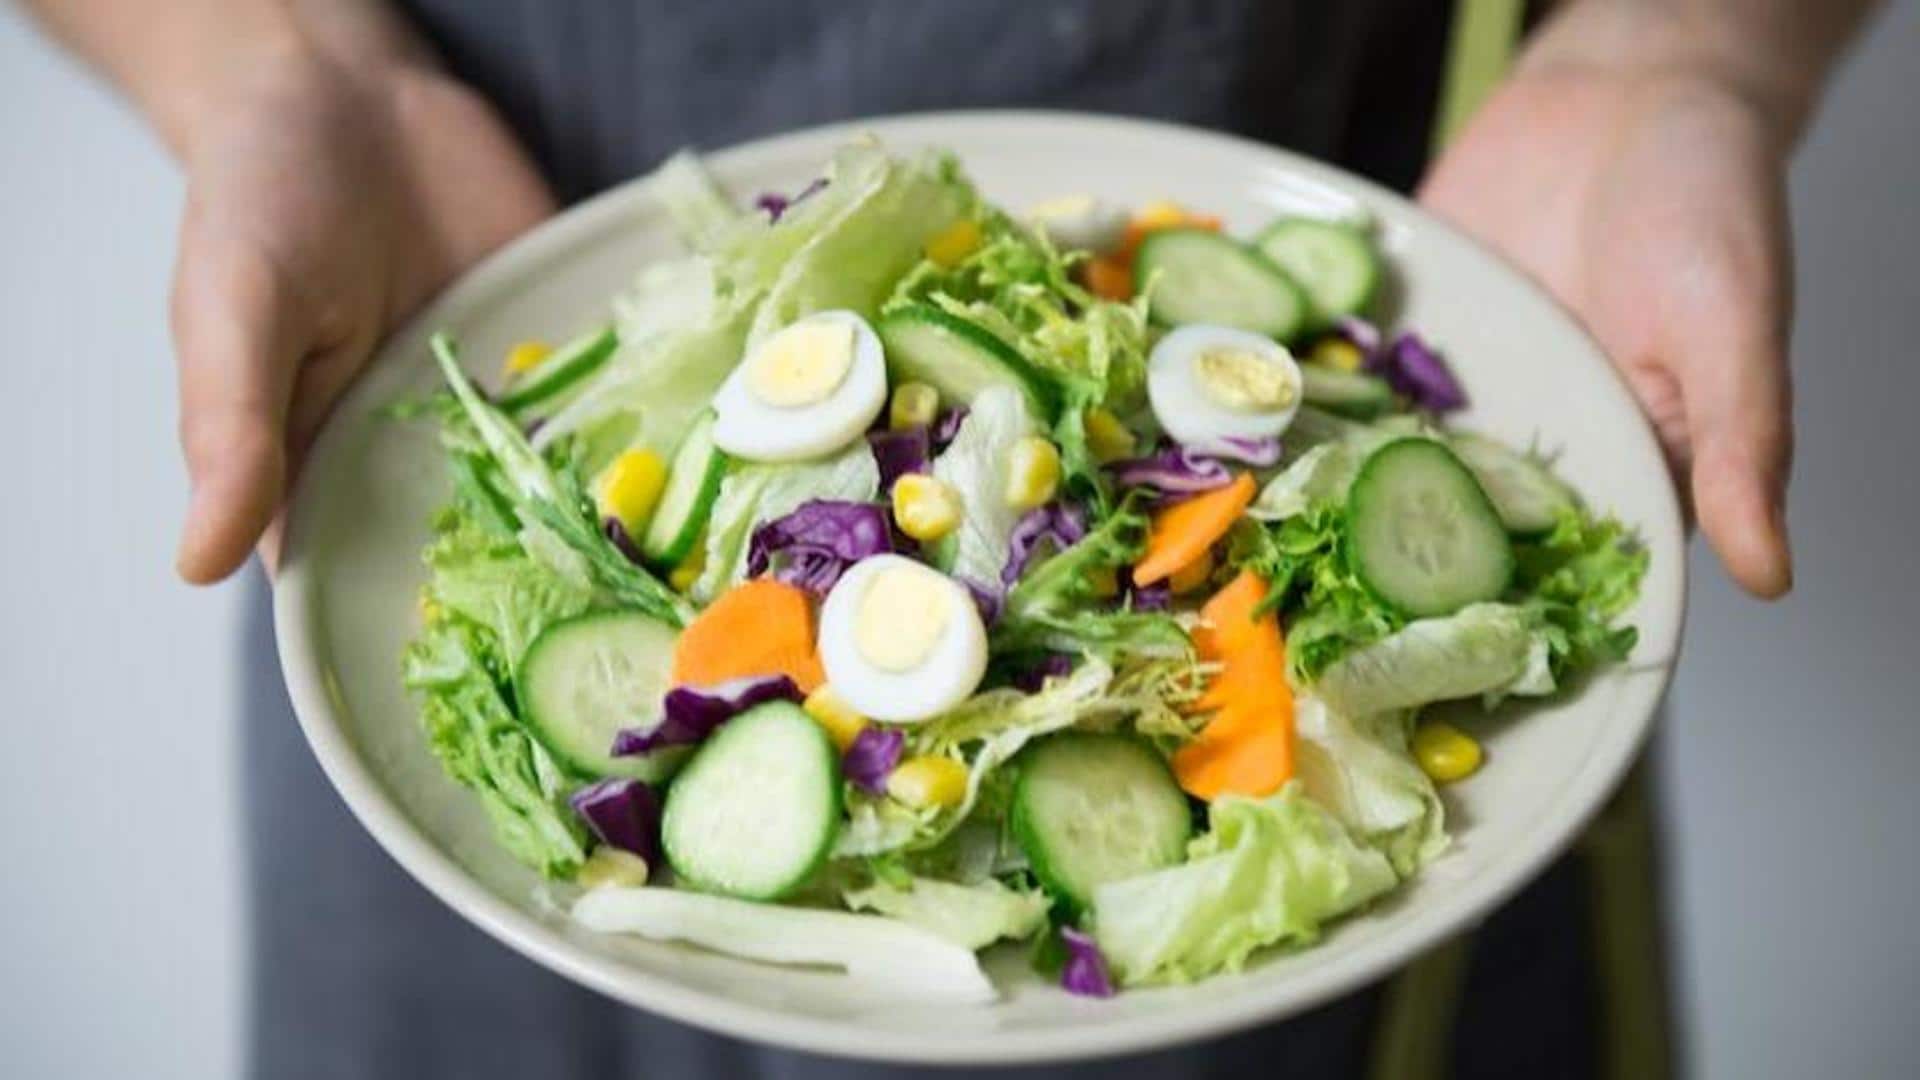 National Salad Month: Make May healthy with these wholesome recipes